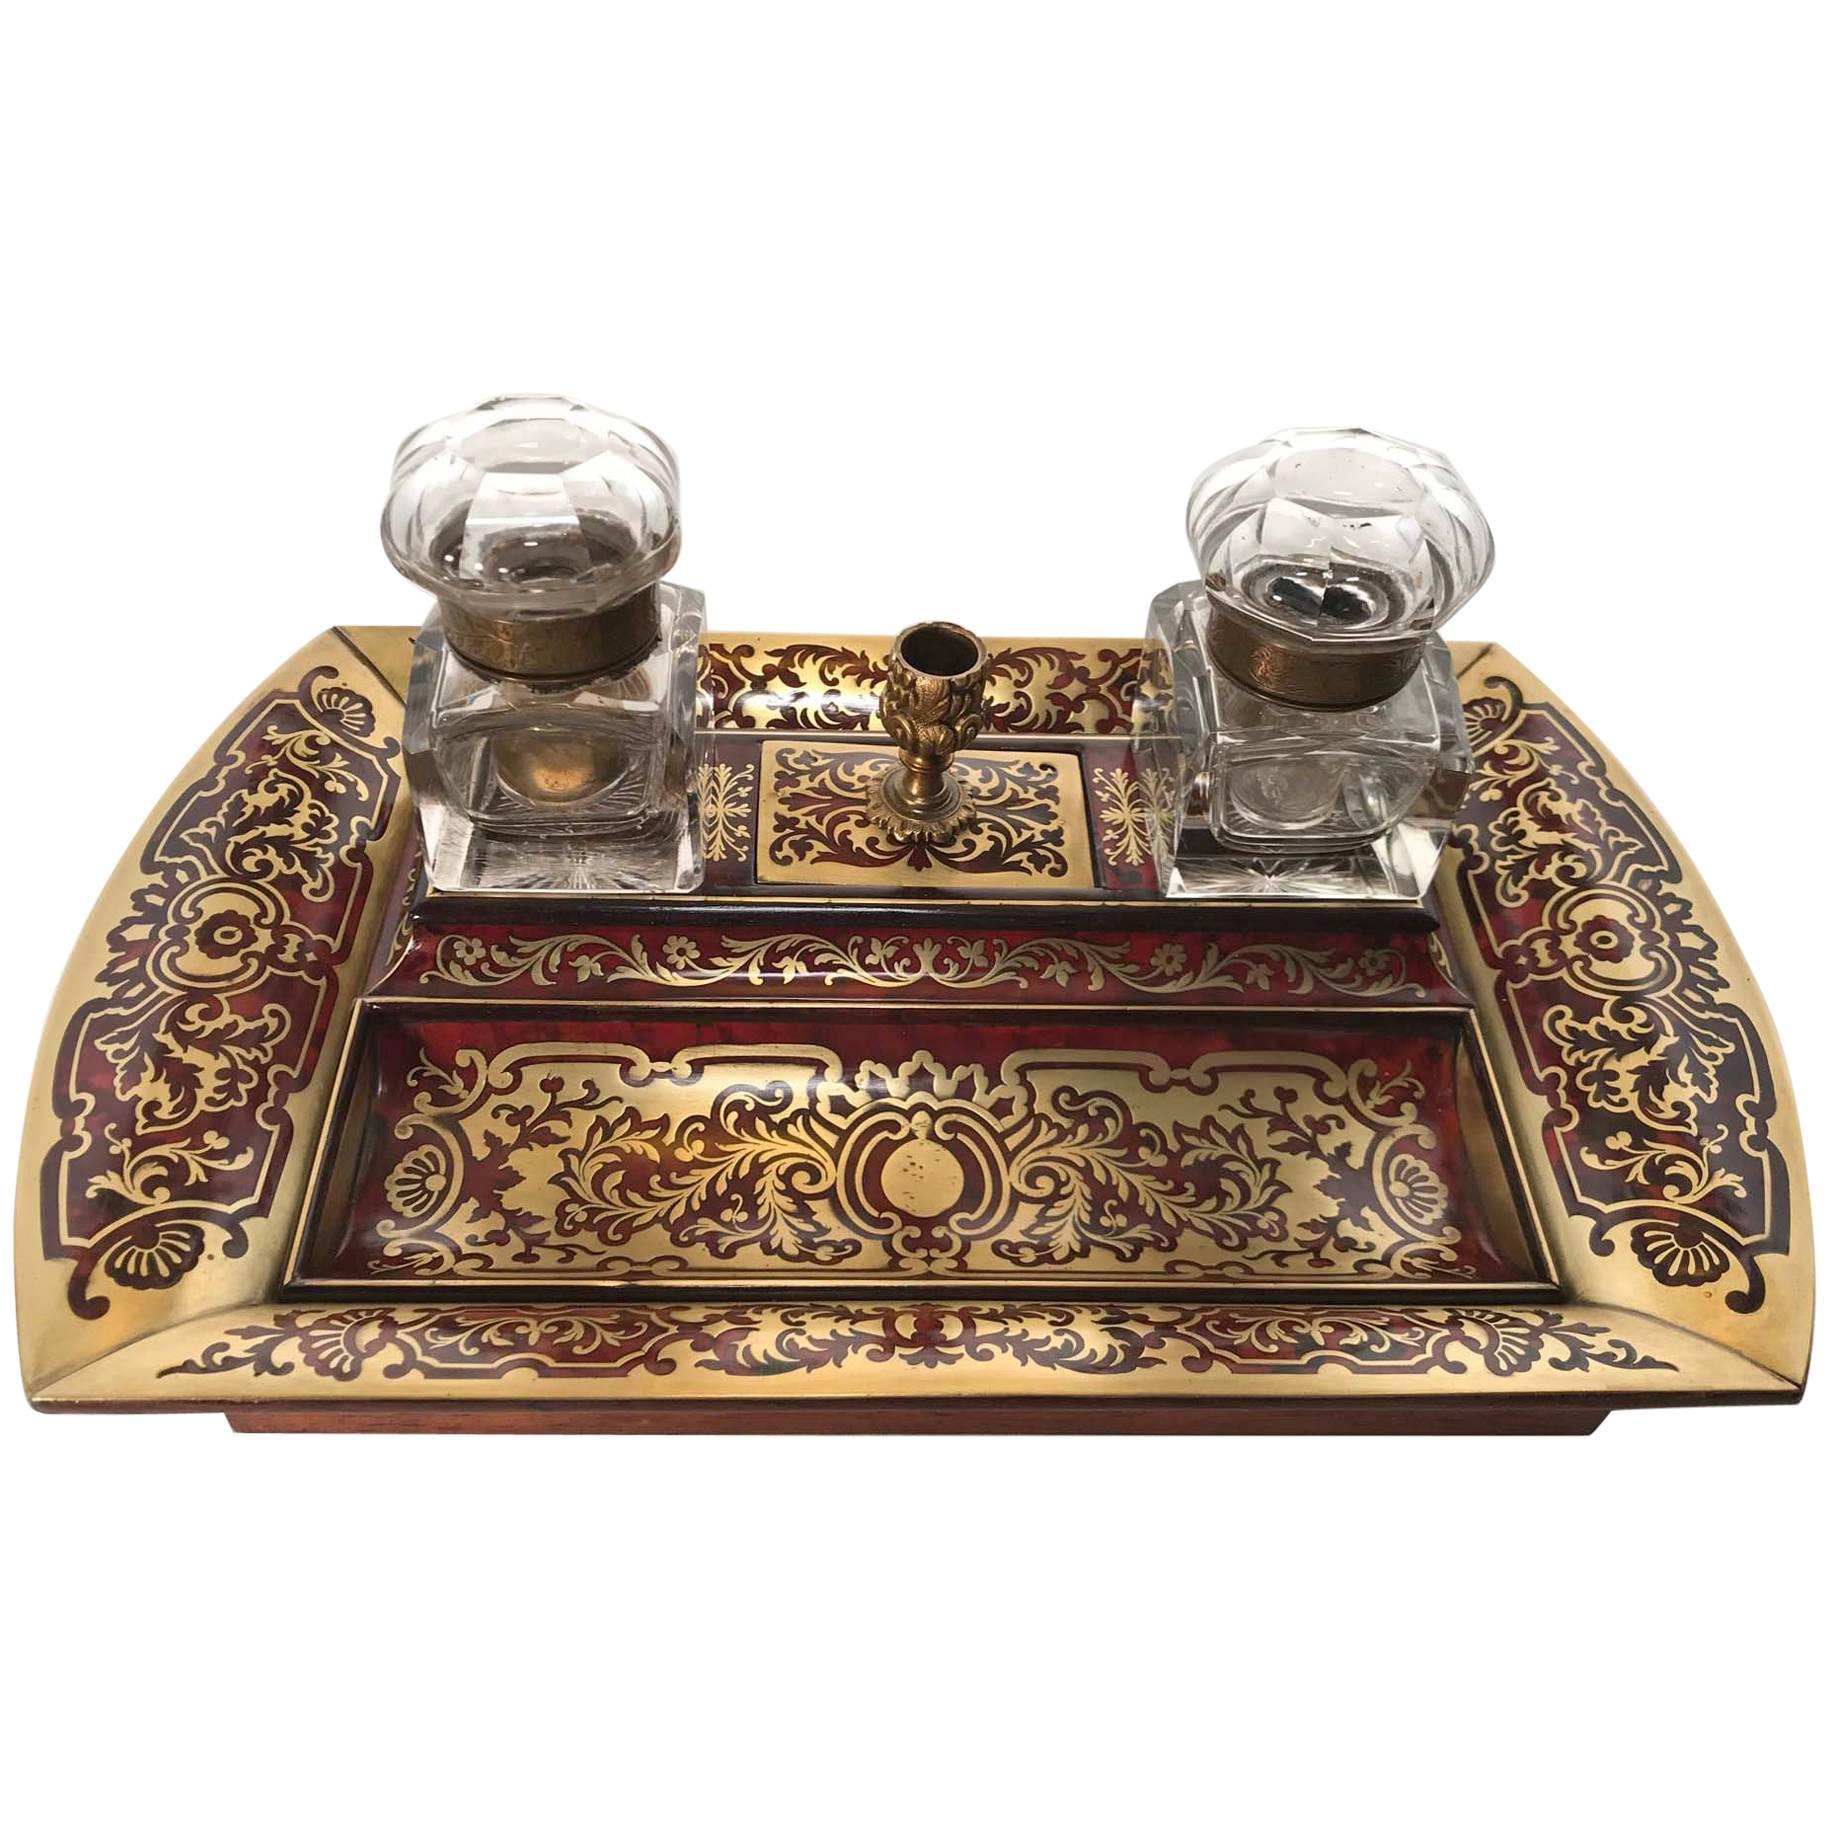 Napoleon 111 Boulle Cut Brass and Scarlet Inkstand